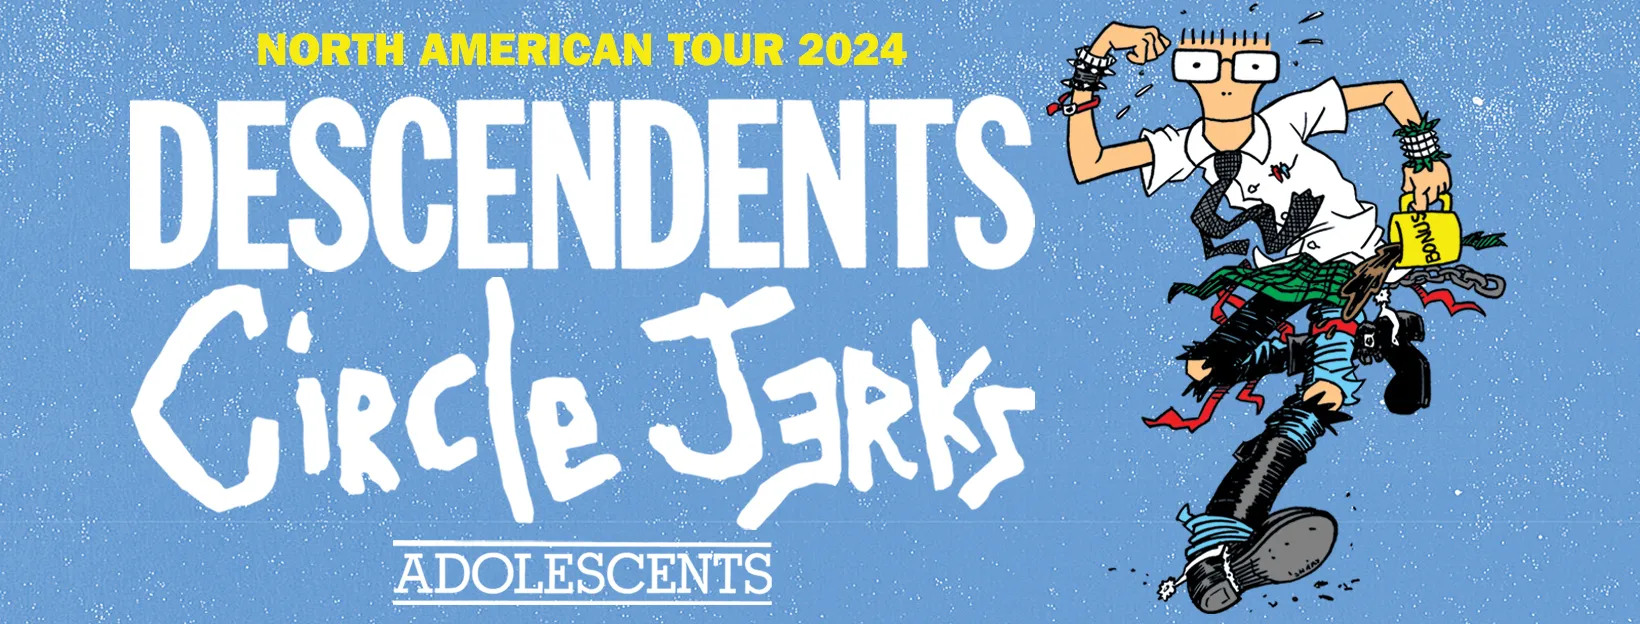 The Descendents & Circle Jerks